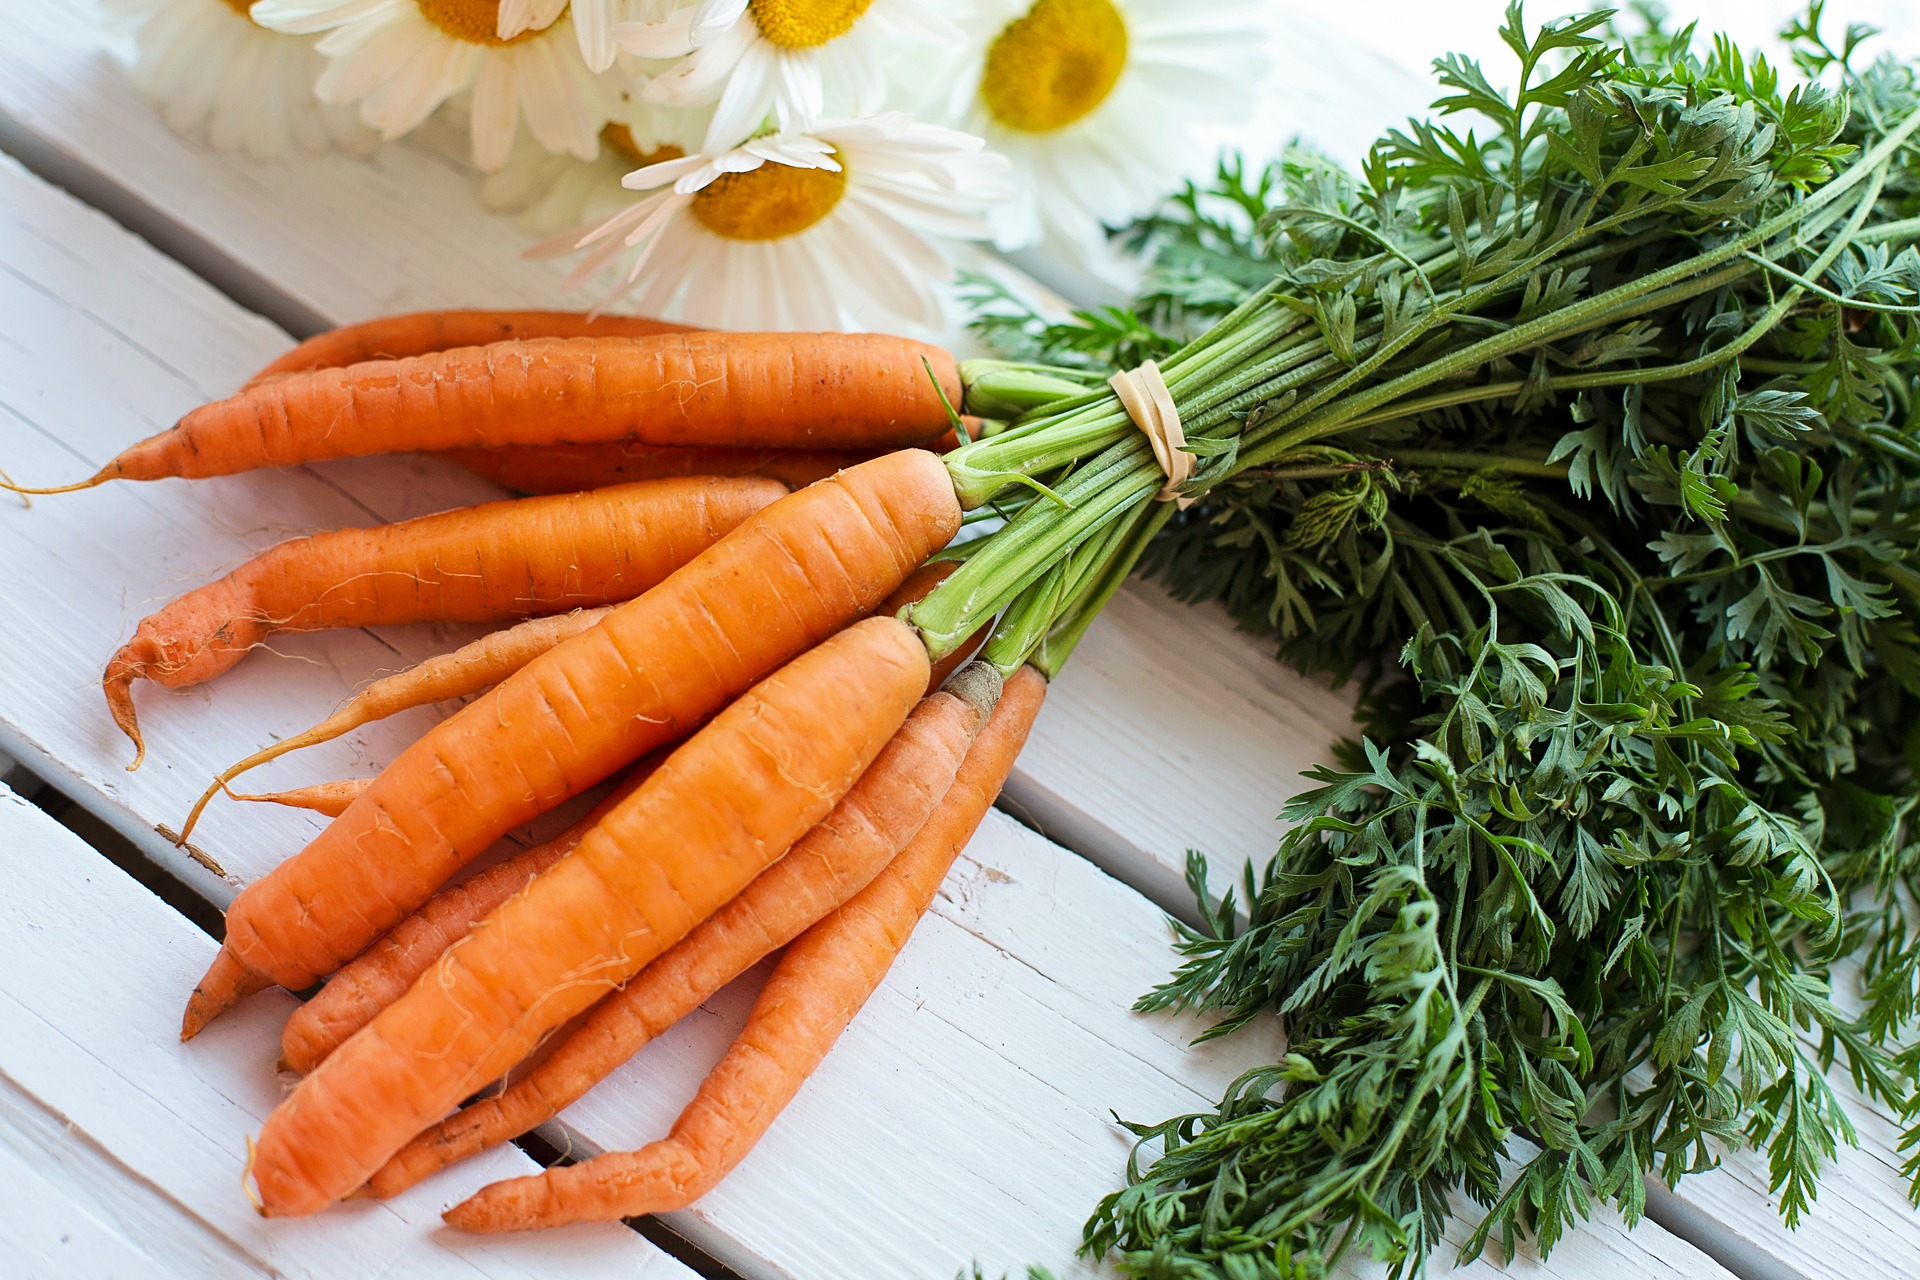 Bunch of carrots for weight loss